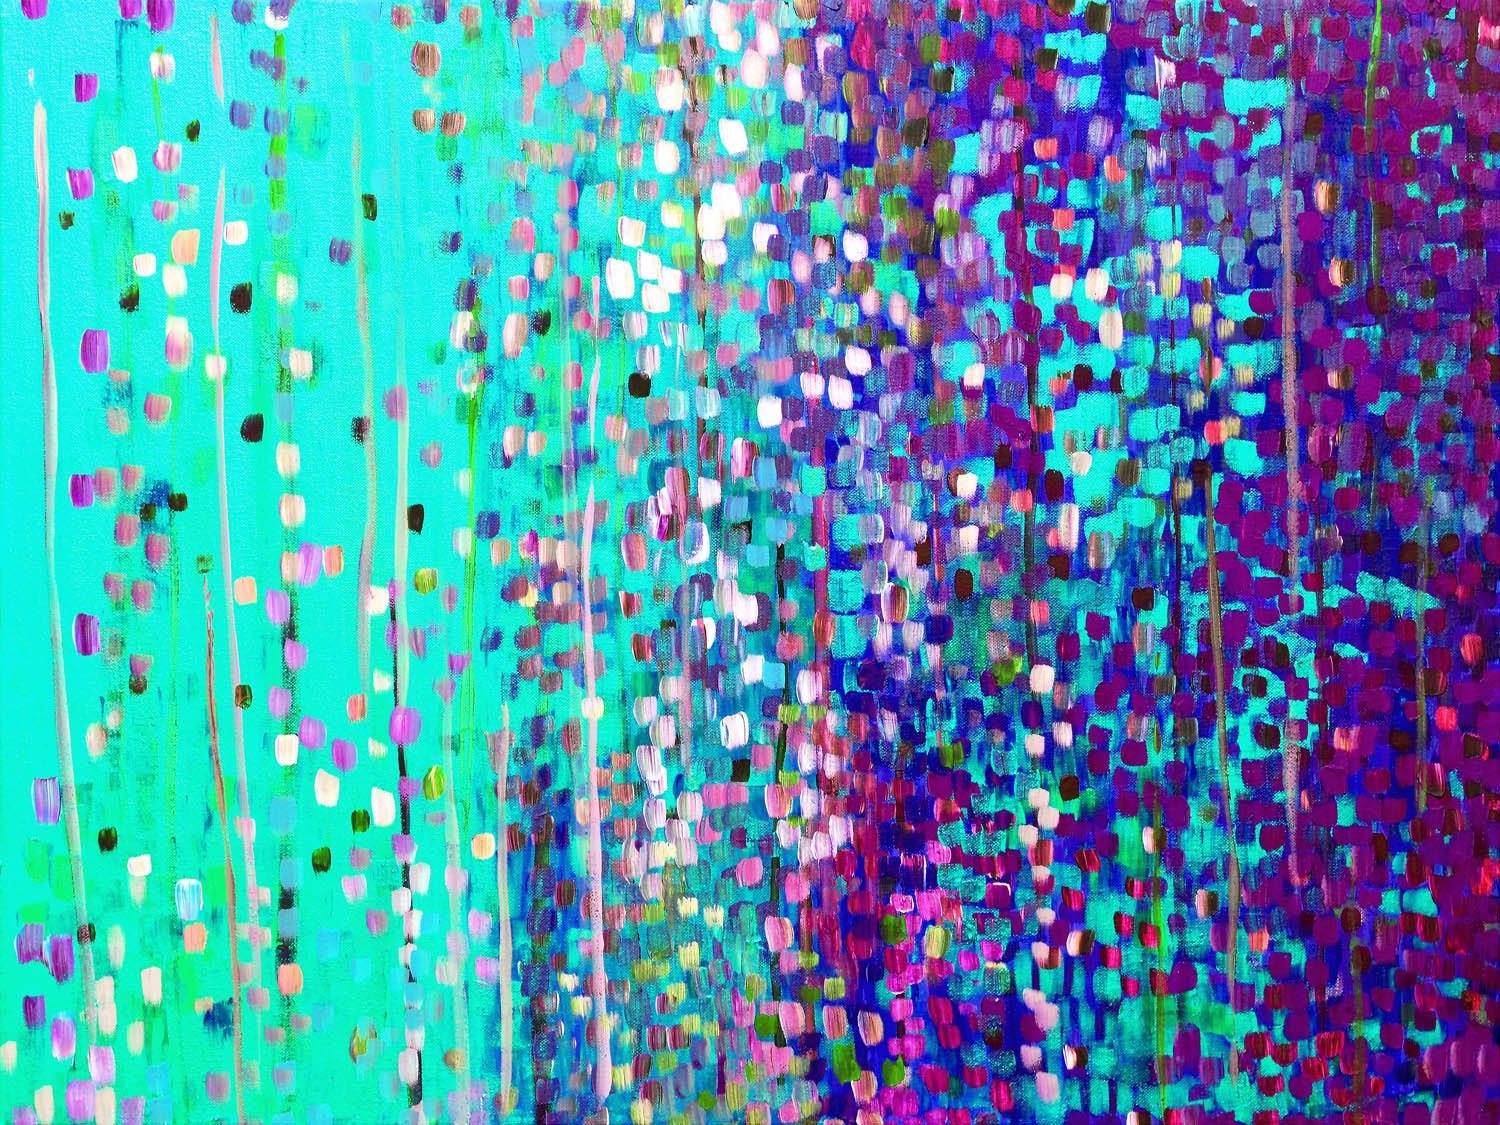 Turquoise & Purple Canvas Print - Louise Mead